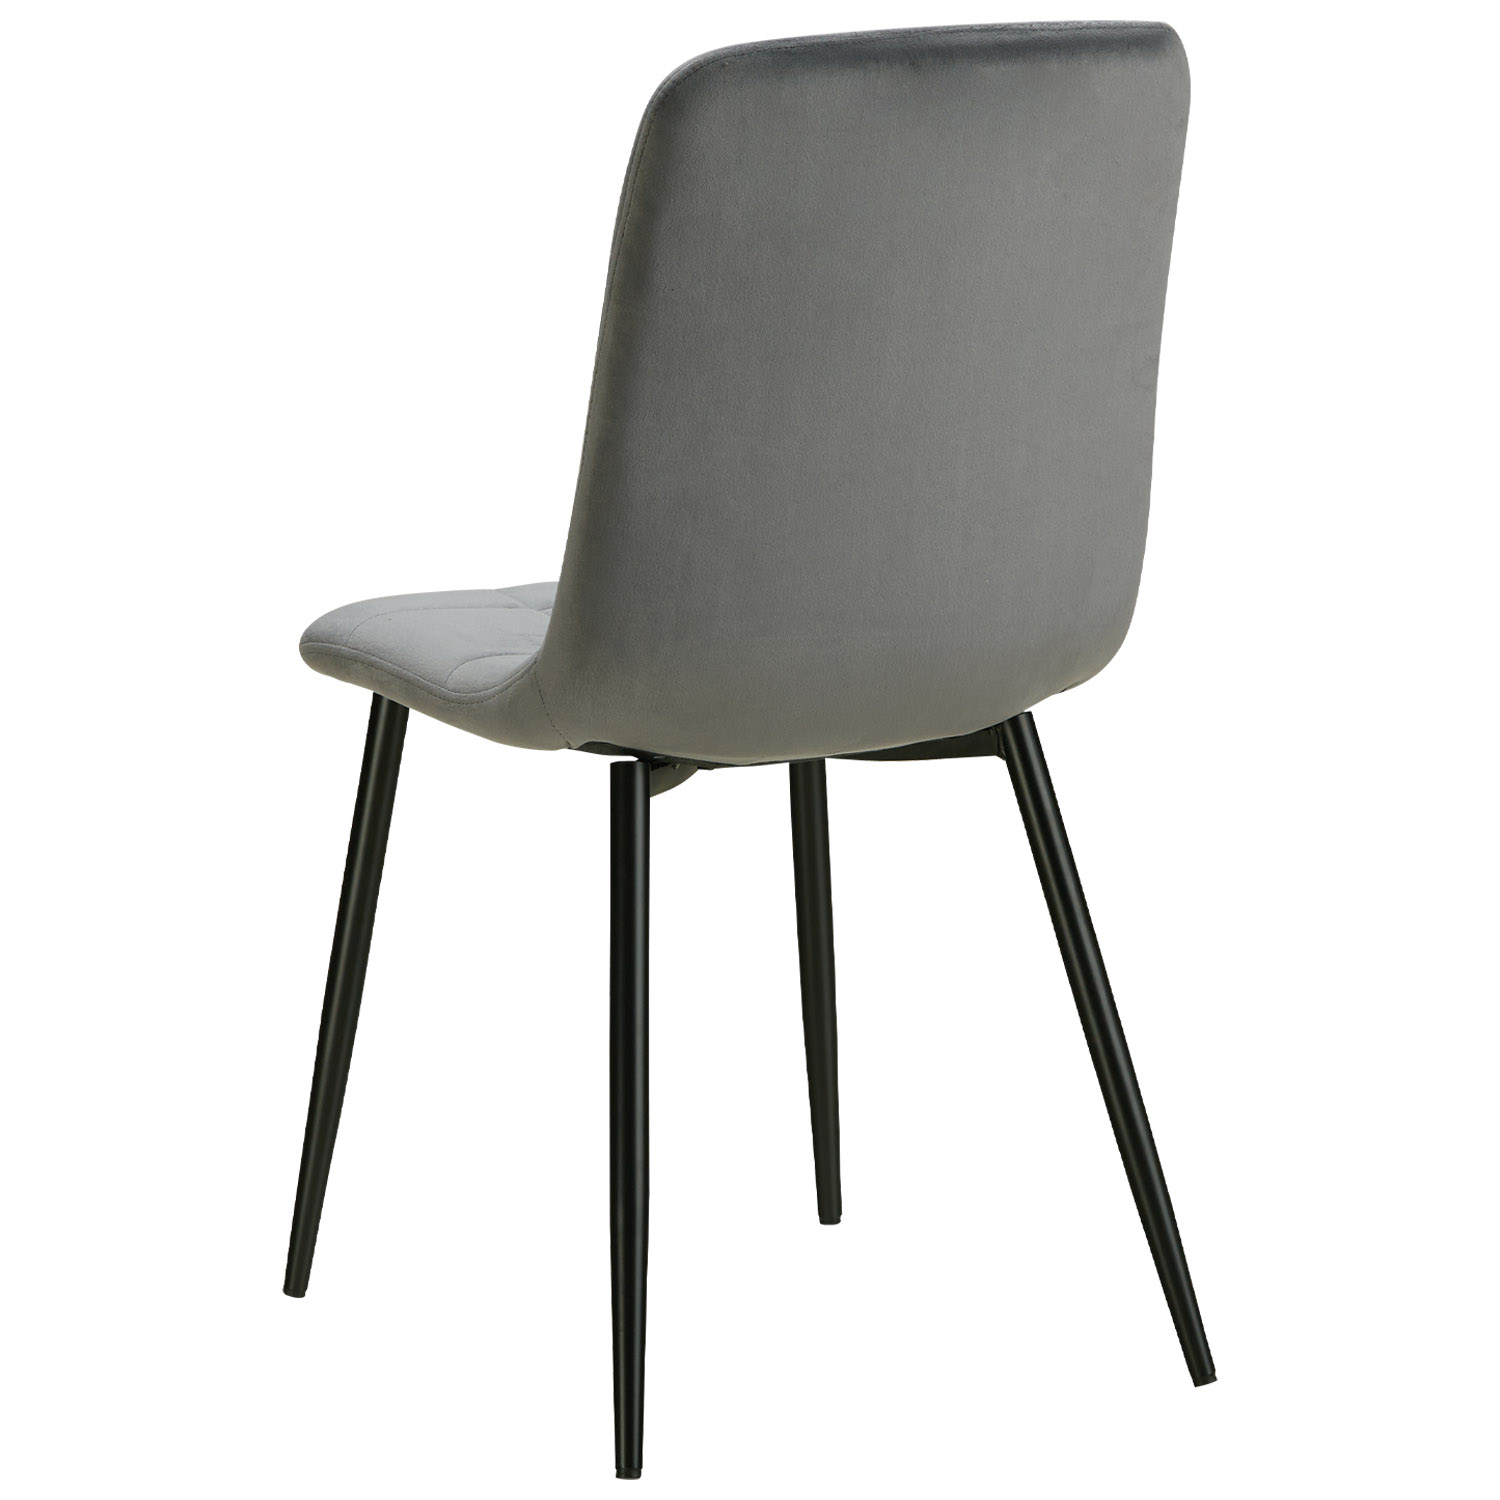 Dining Chair Set of 6 Egg Chairs Grey Armchairs Dining Room Chairs Upholstered Chairs Eames Chairs